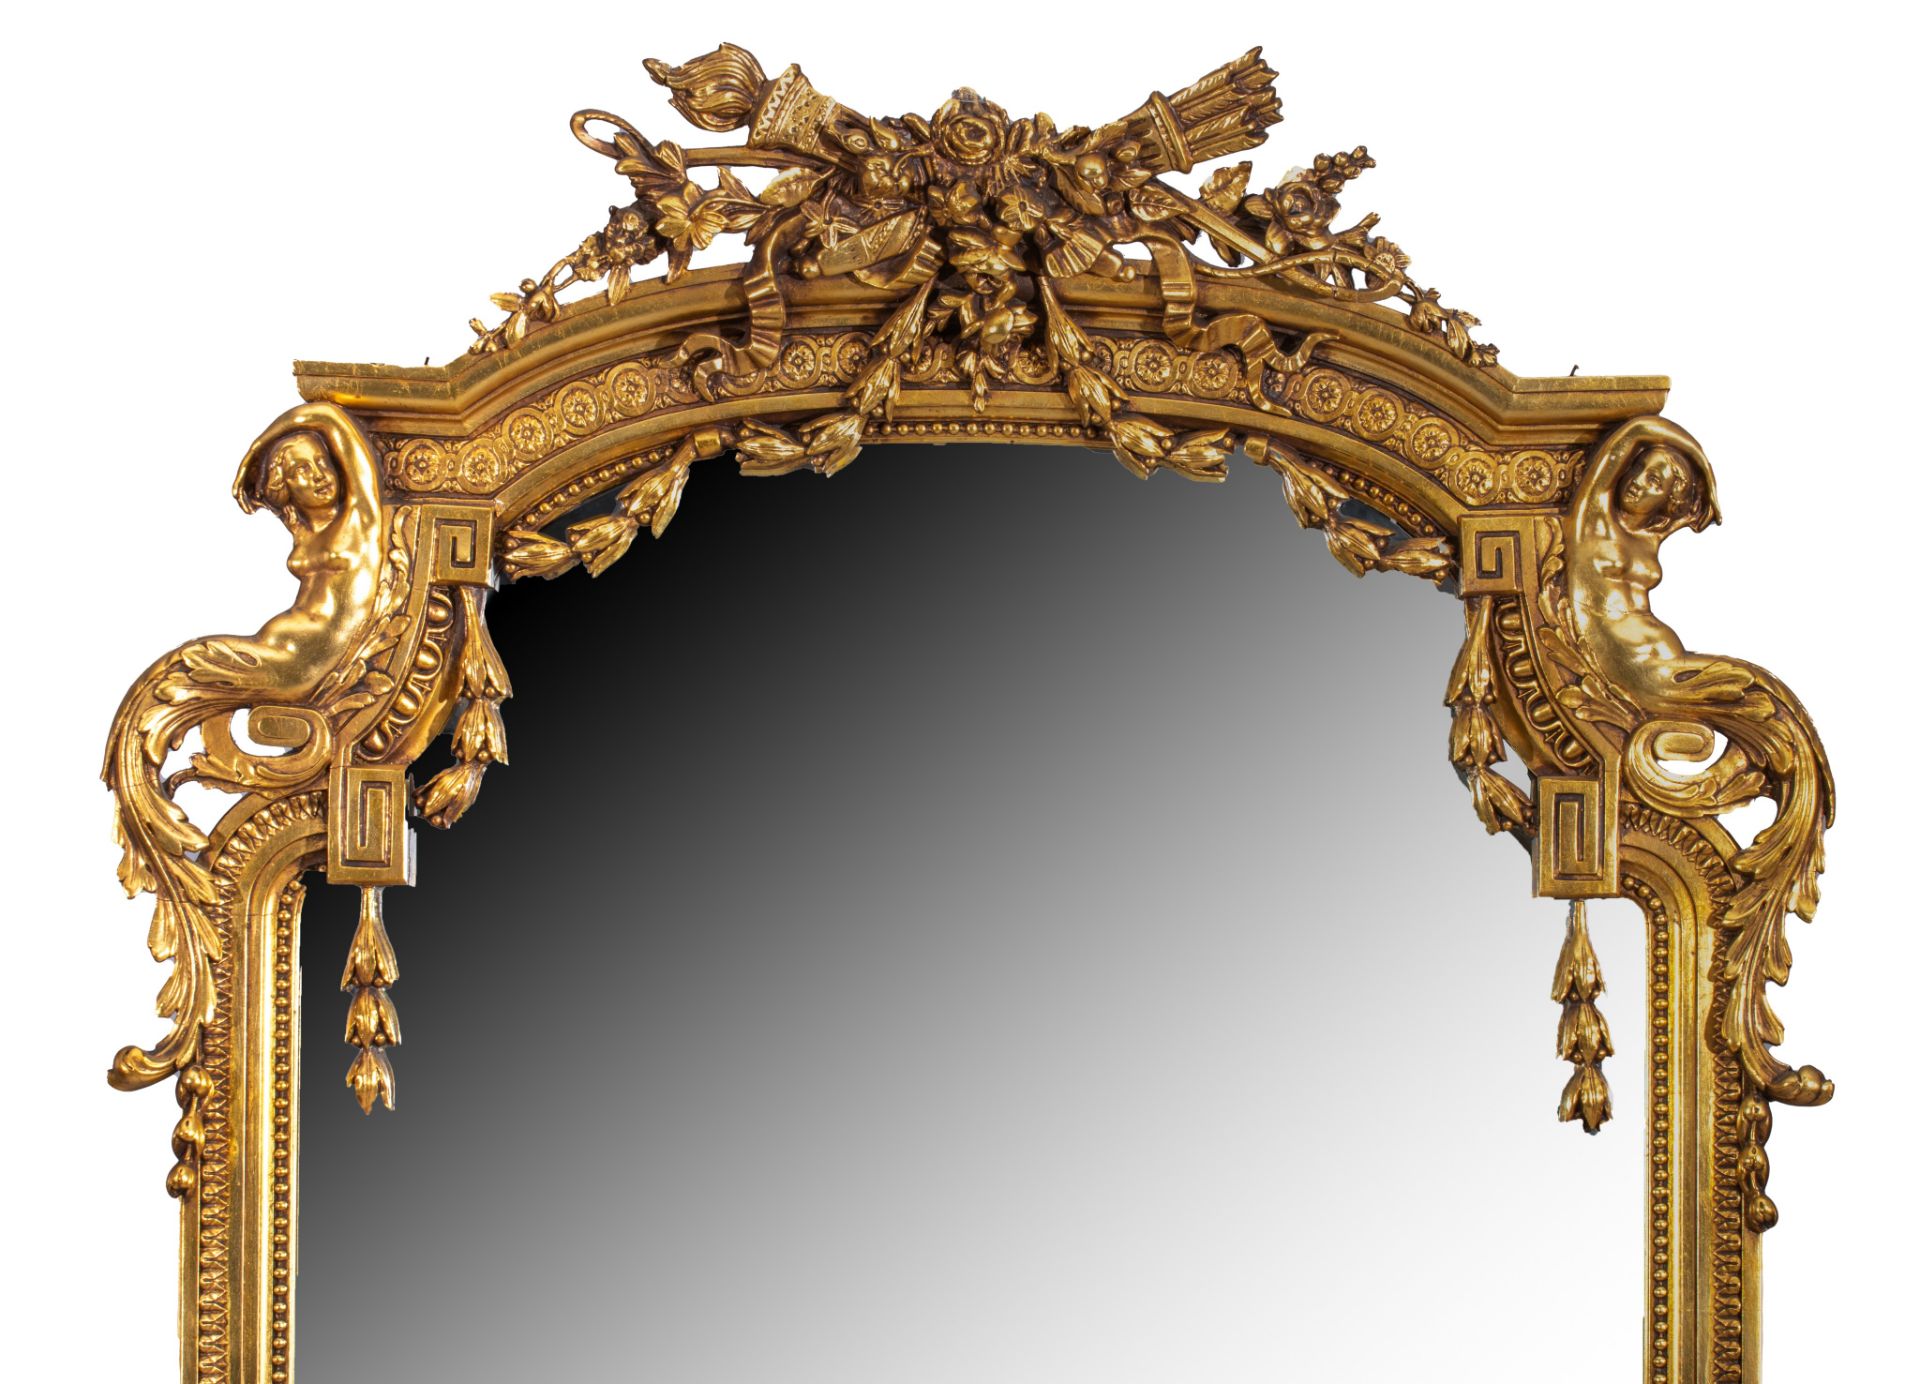 An imposing Neoclassical console table and matching wall mirror, H 92 - W 137 - D 40 - 116 x 191 cm - Image 4 of 11